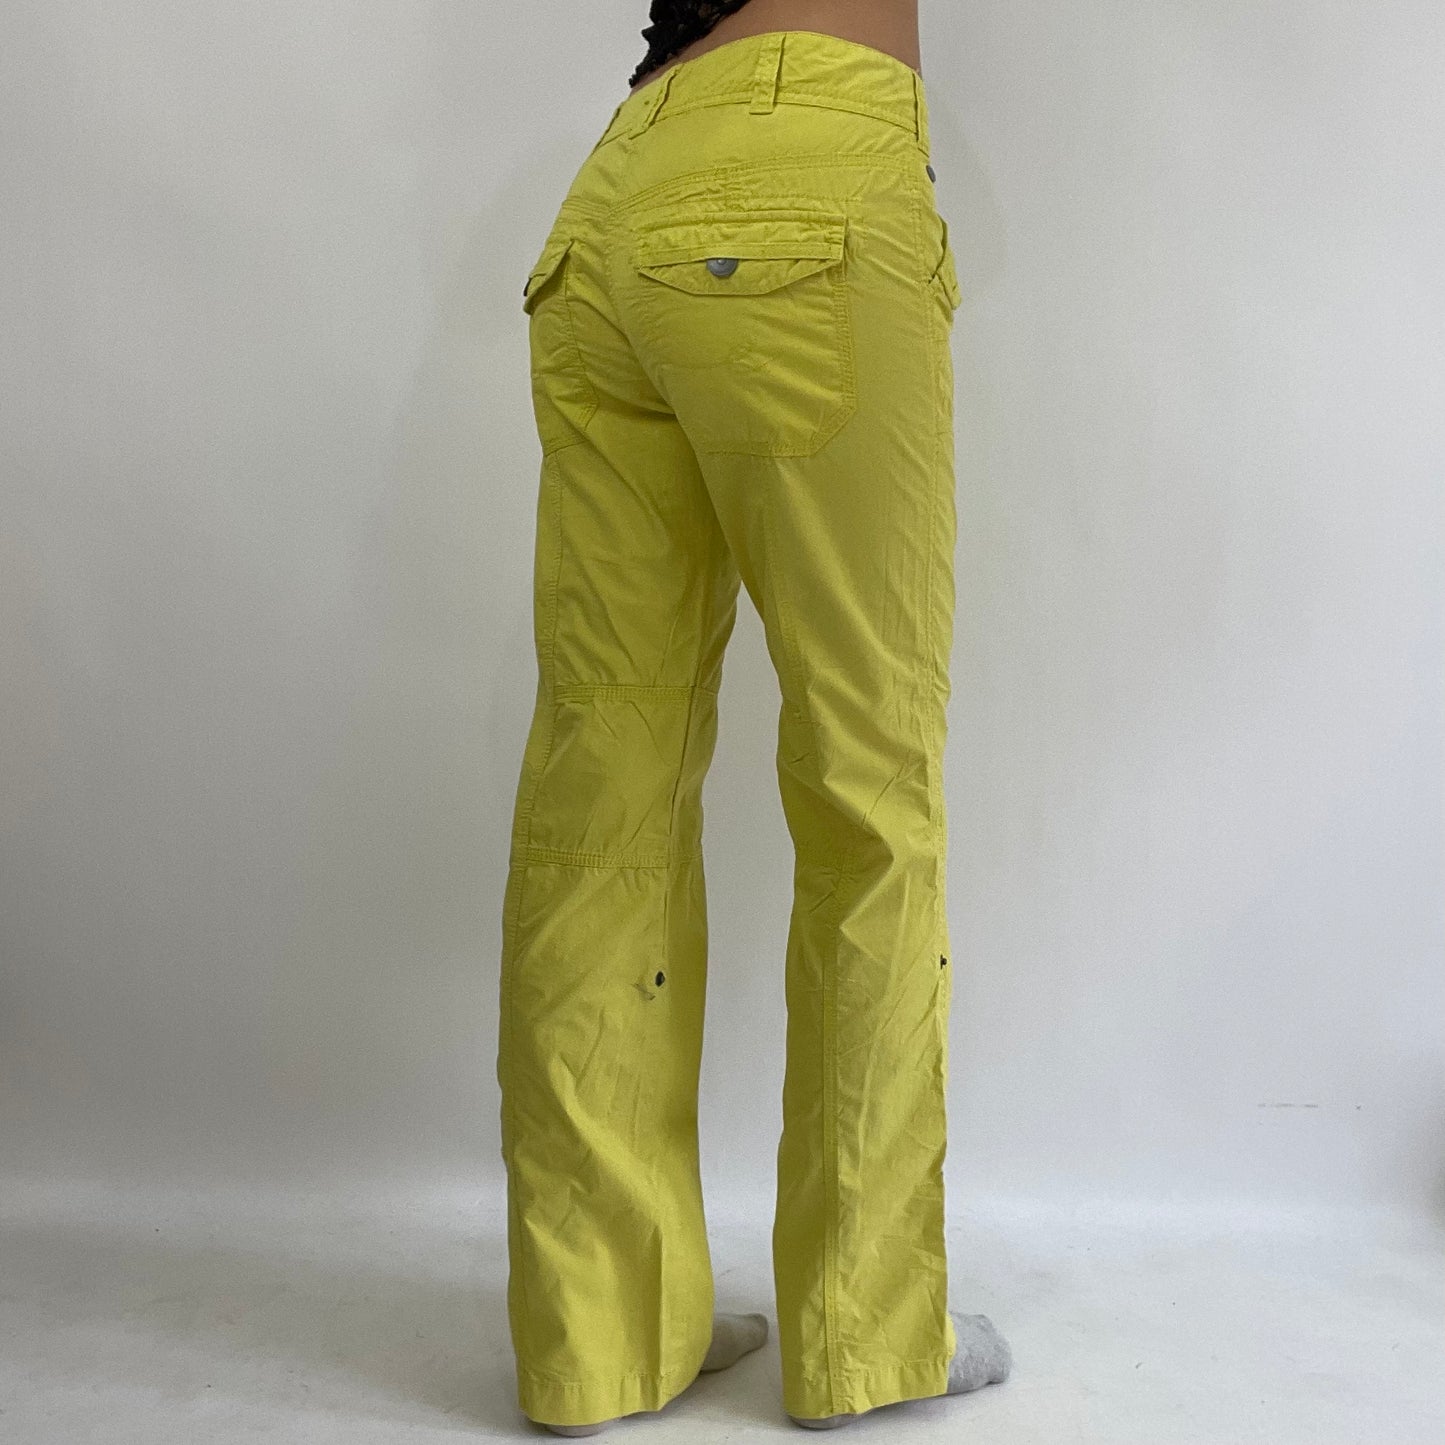 HAILEY BIEBER DROP | small yellow cargo trousers